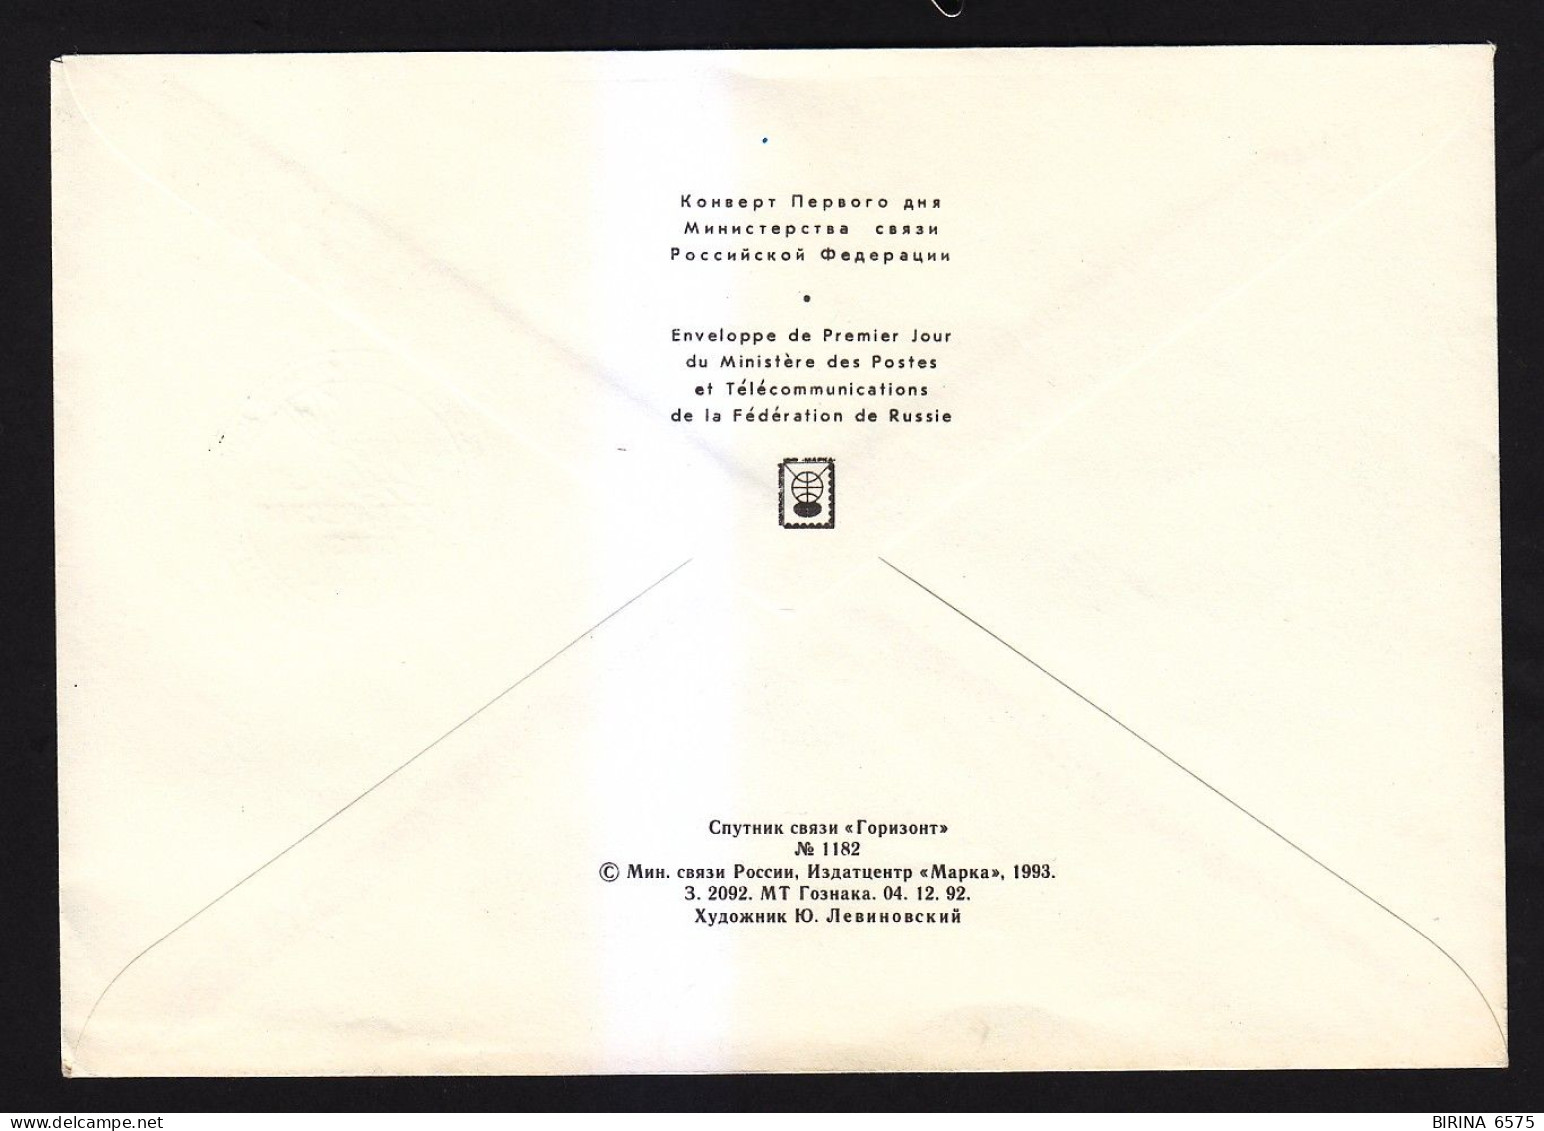 Envelope. Russia. SPACE COMMUNICATION. - 7-7 - Covers & Documents